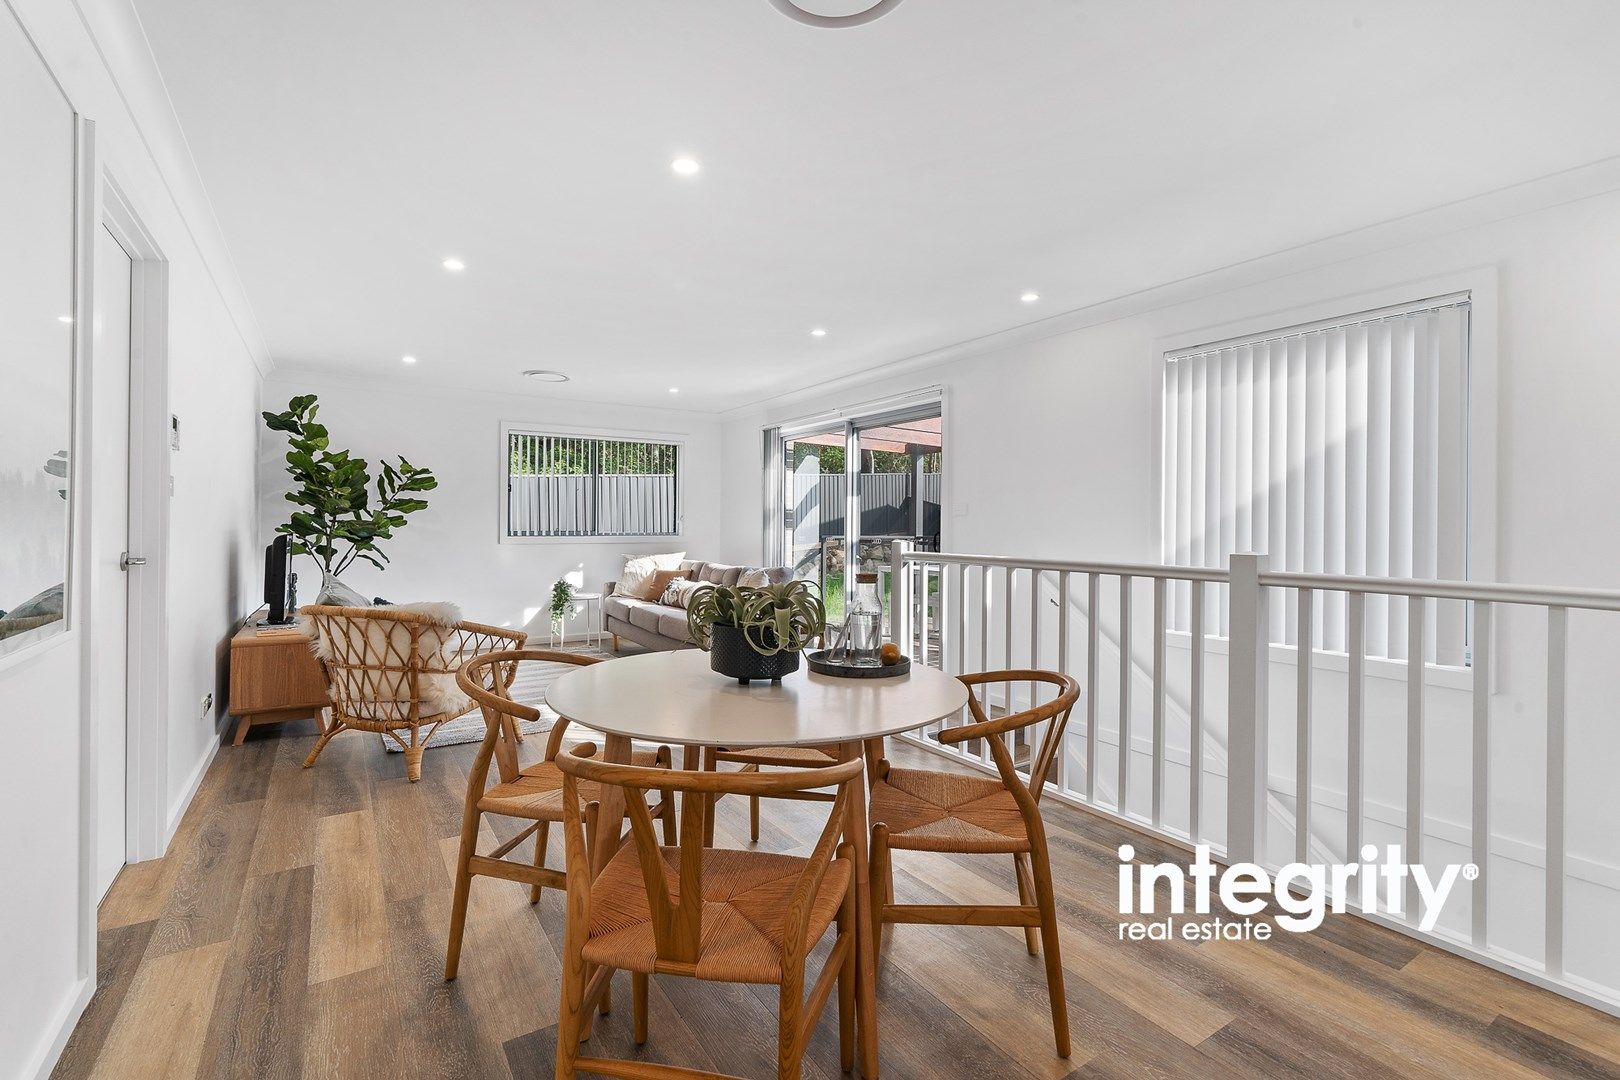 2-4 & 10-14/76 Brinawarr Street, Bomaderry NSW 2541, Image 0